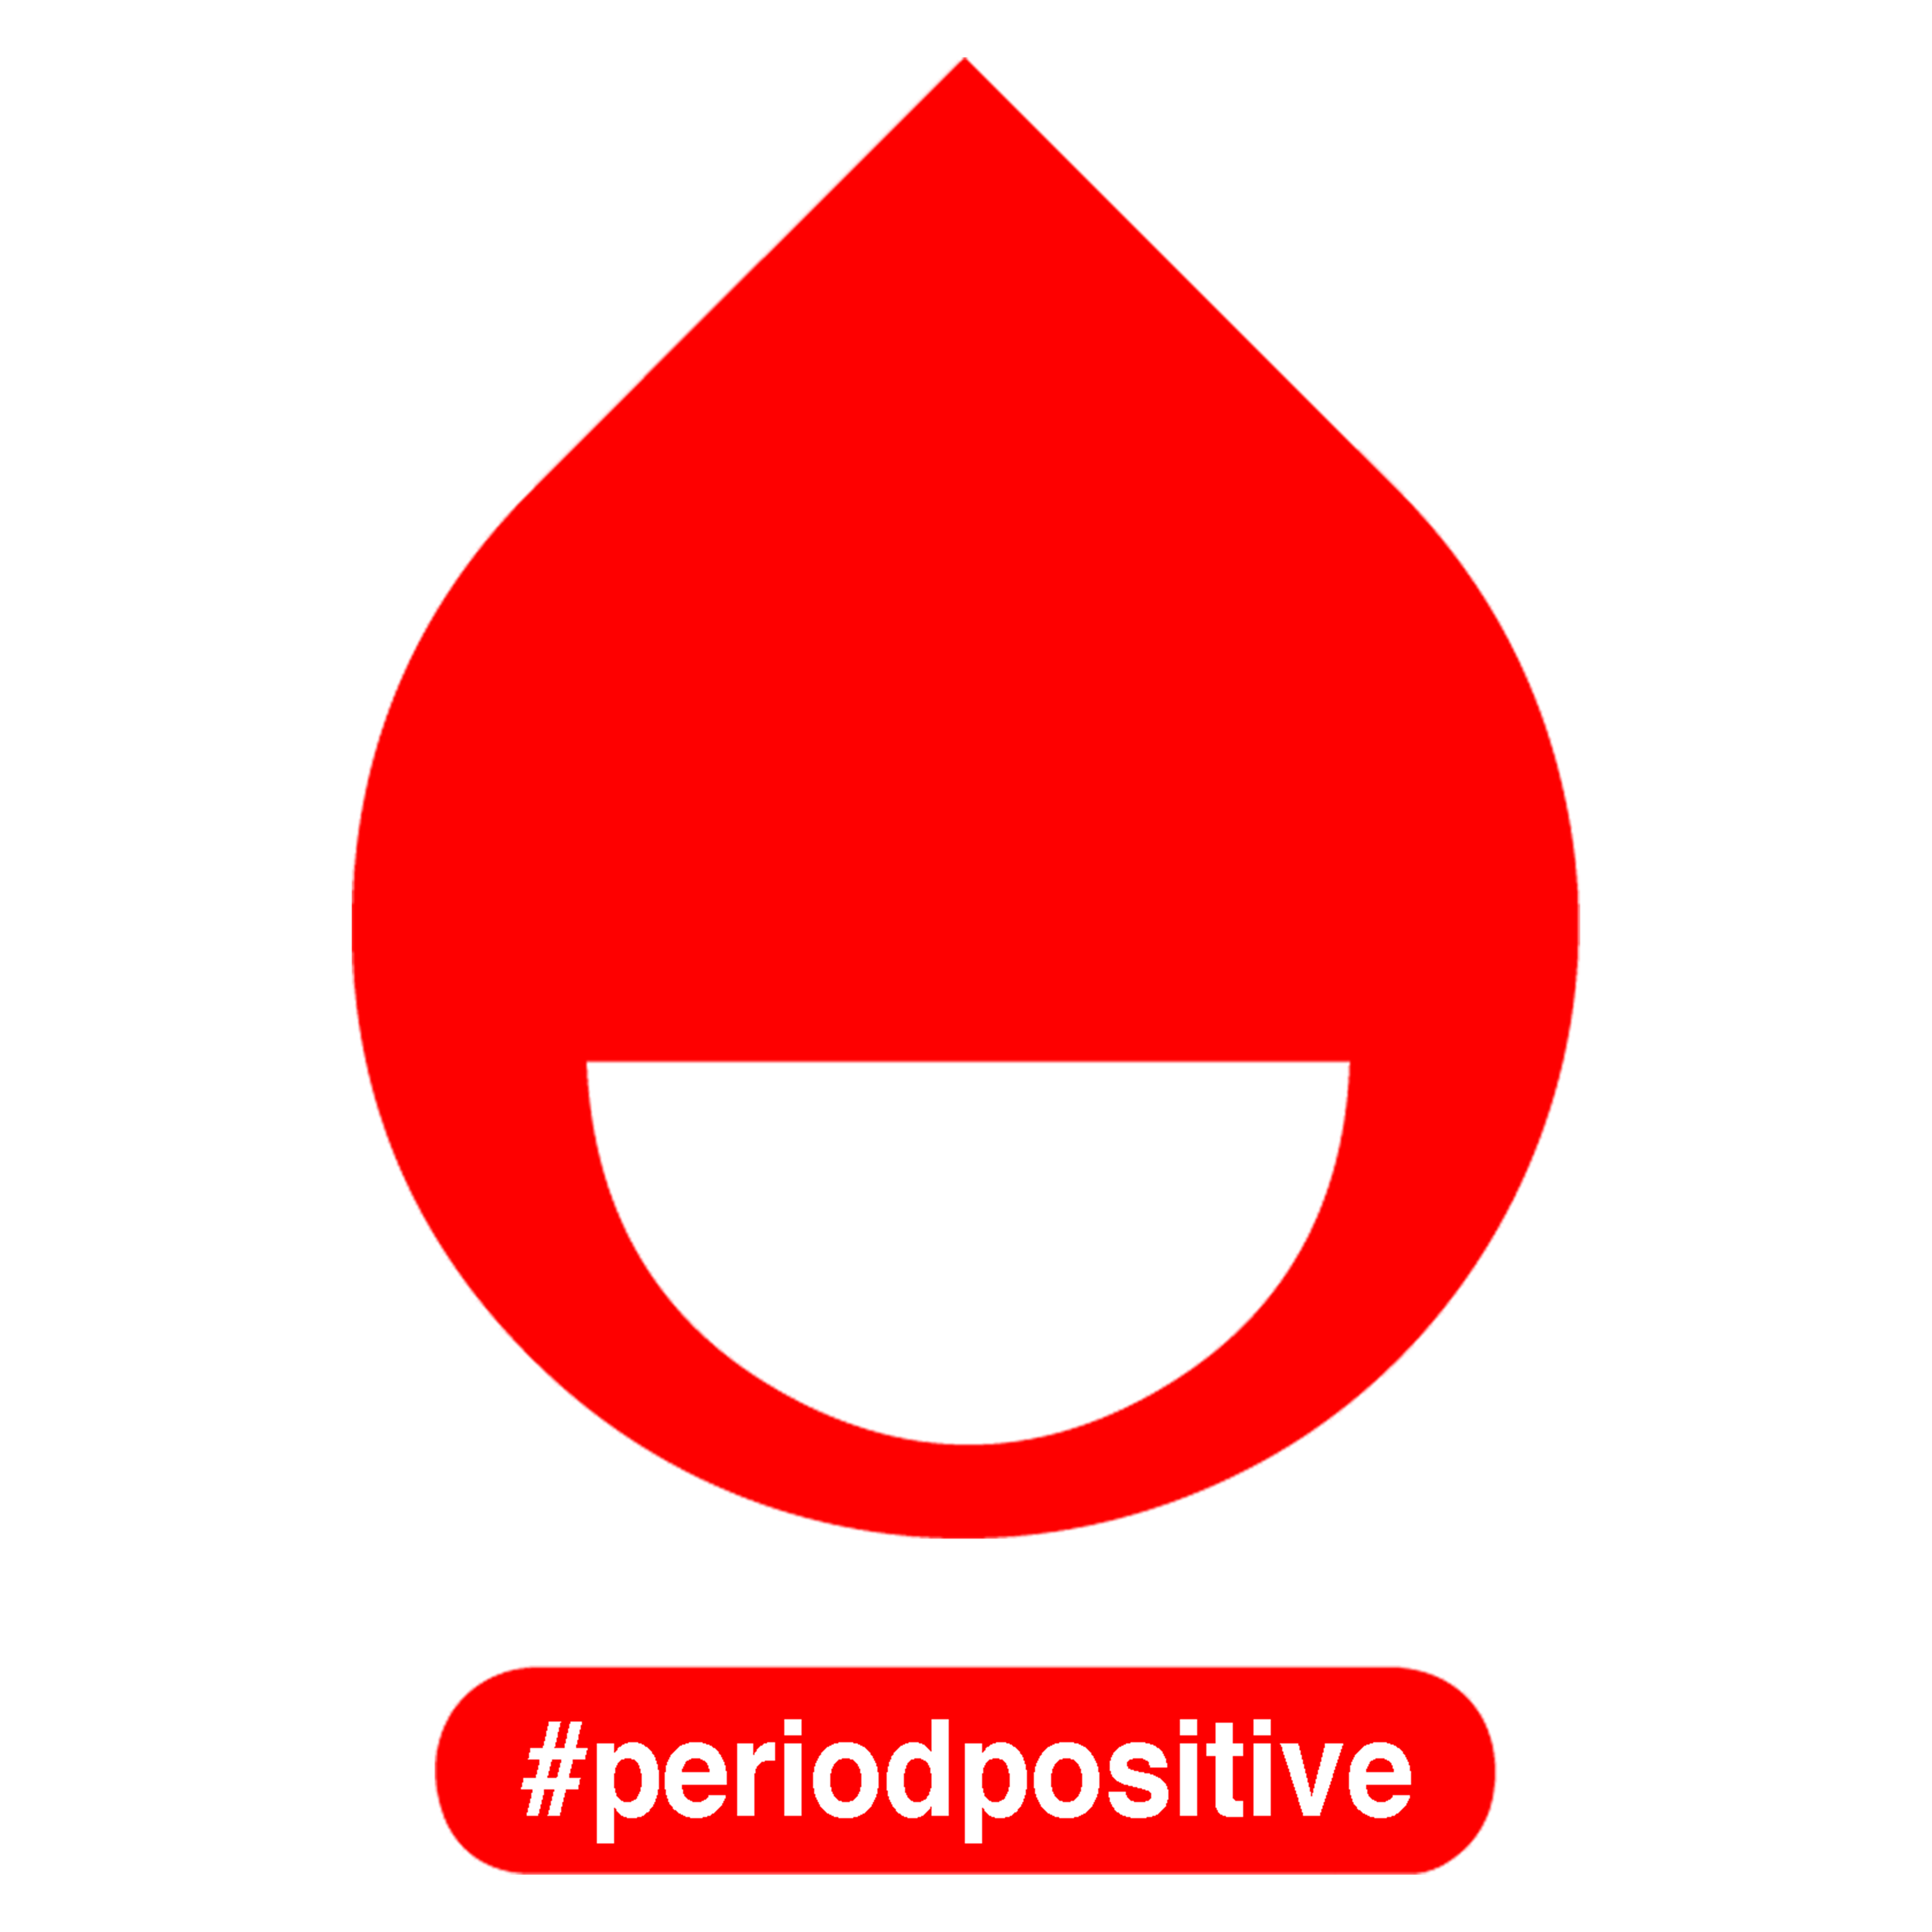 Period Positives, Menstrual Hygiene Management, and The Feminist Issue of Our Times